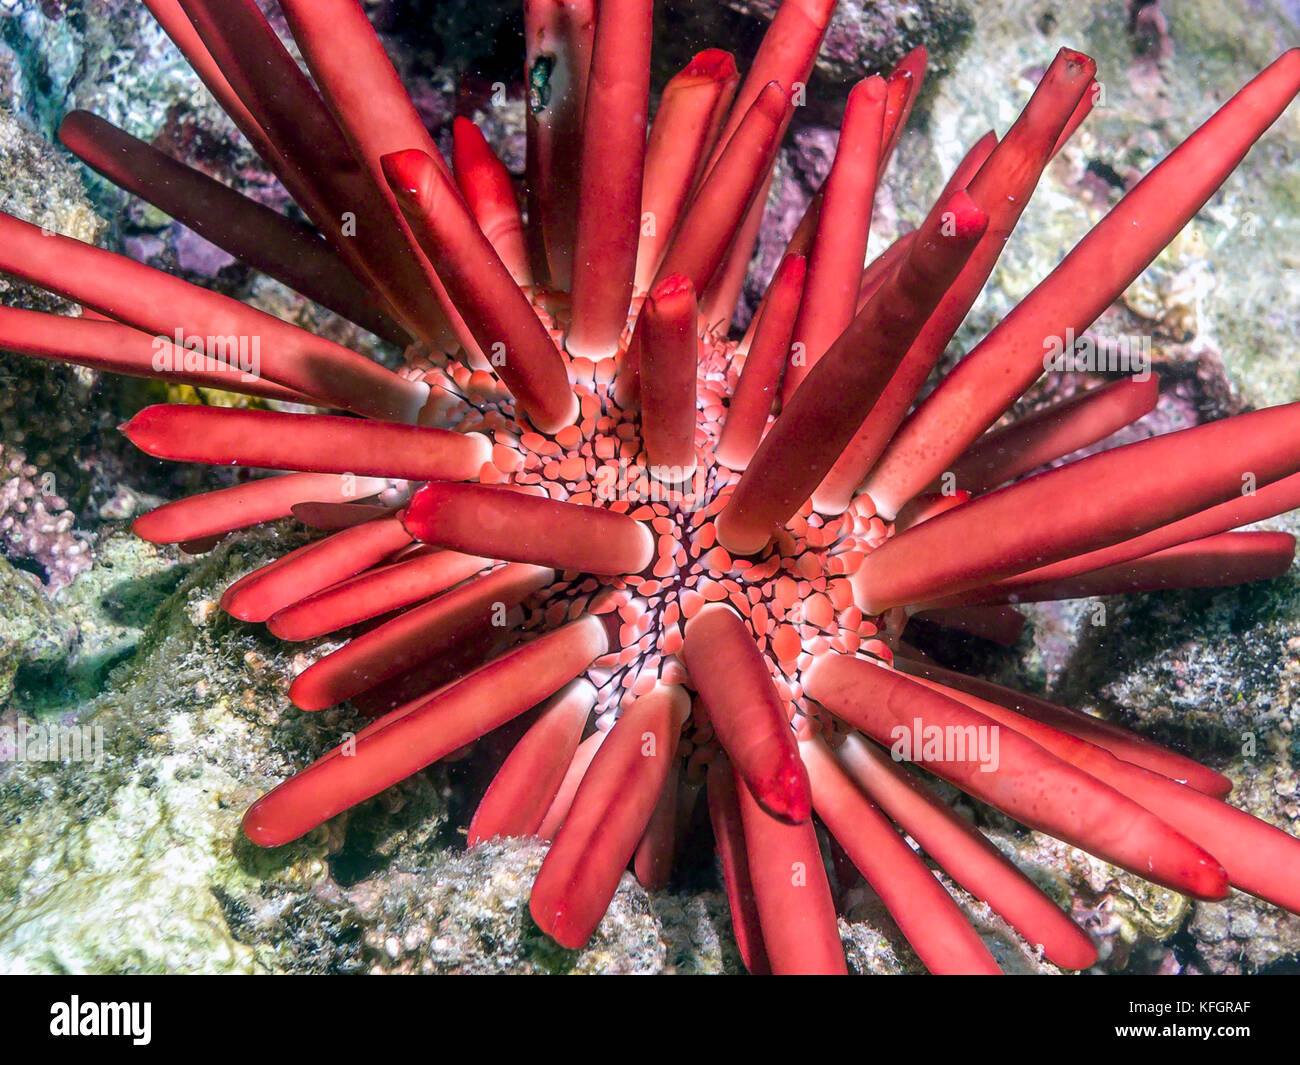 Heterocentrotus mamillatusn is a species of tropical sea urchin from the Indo-Pacific region. Stock Photo